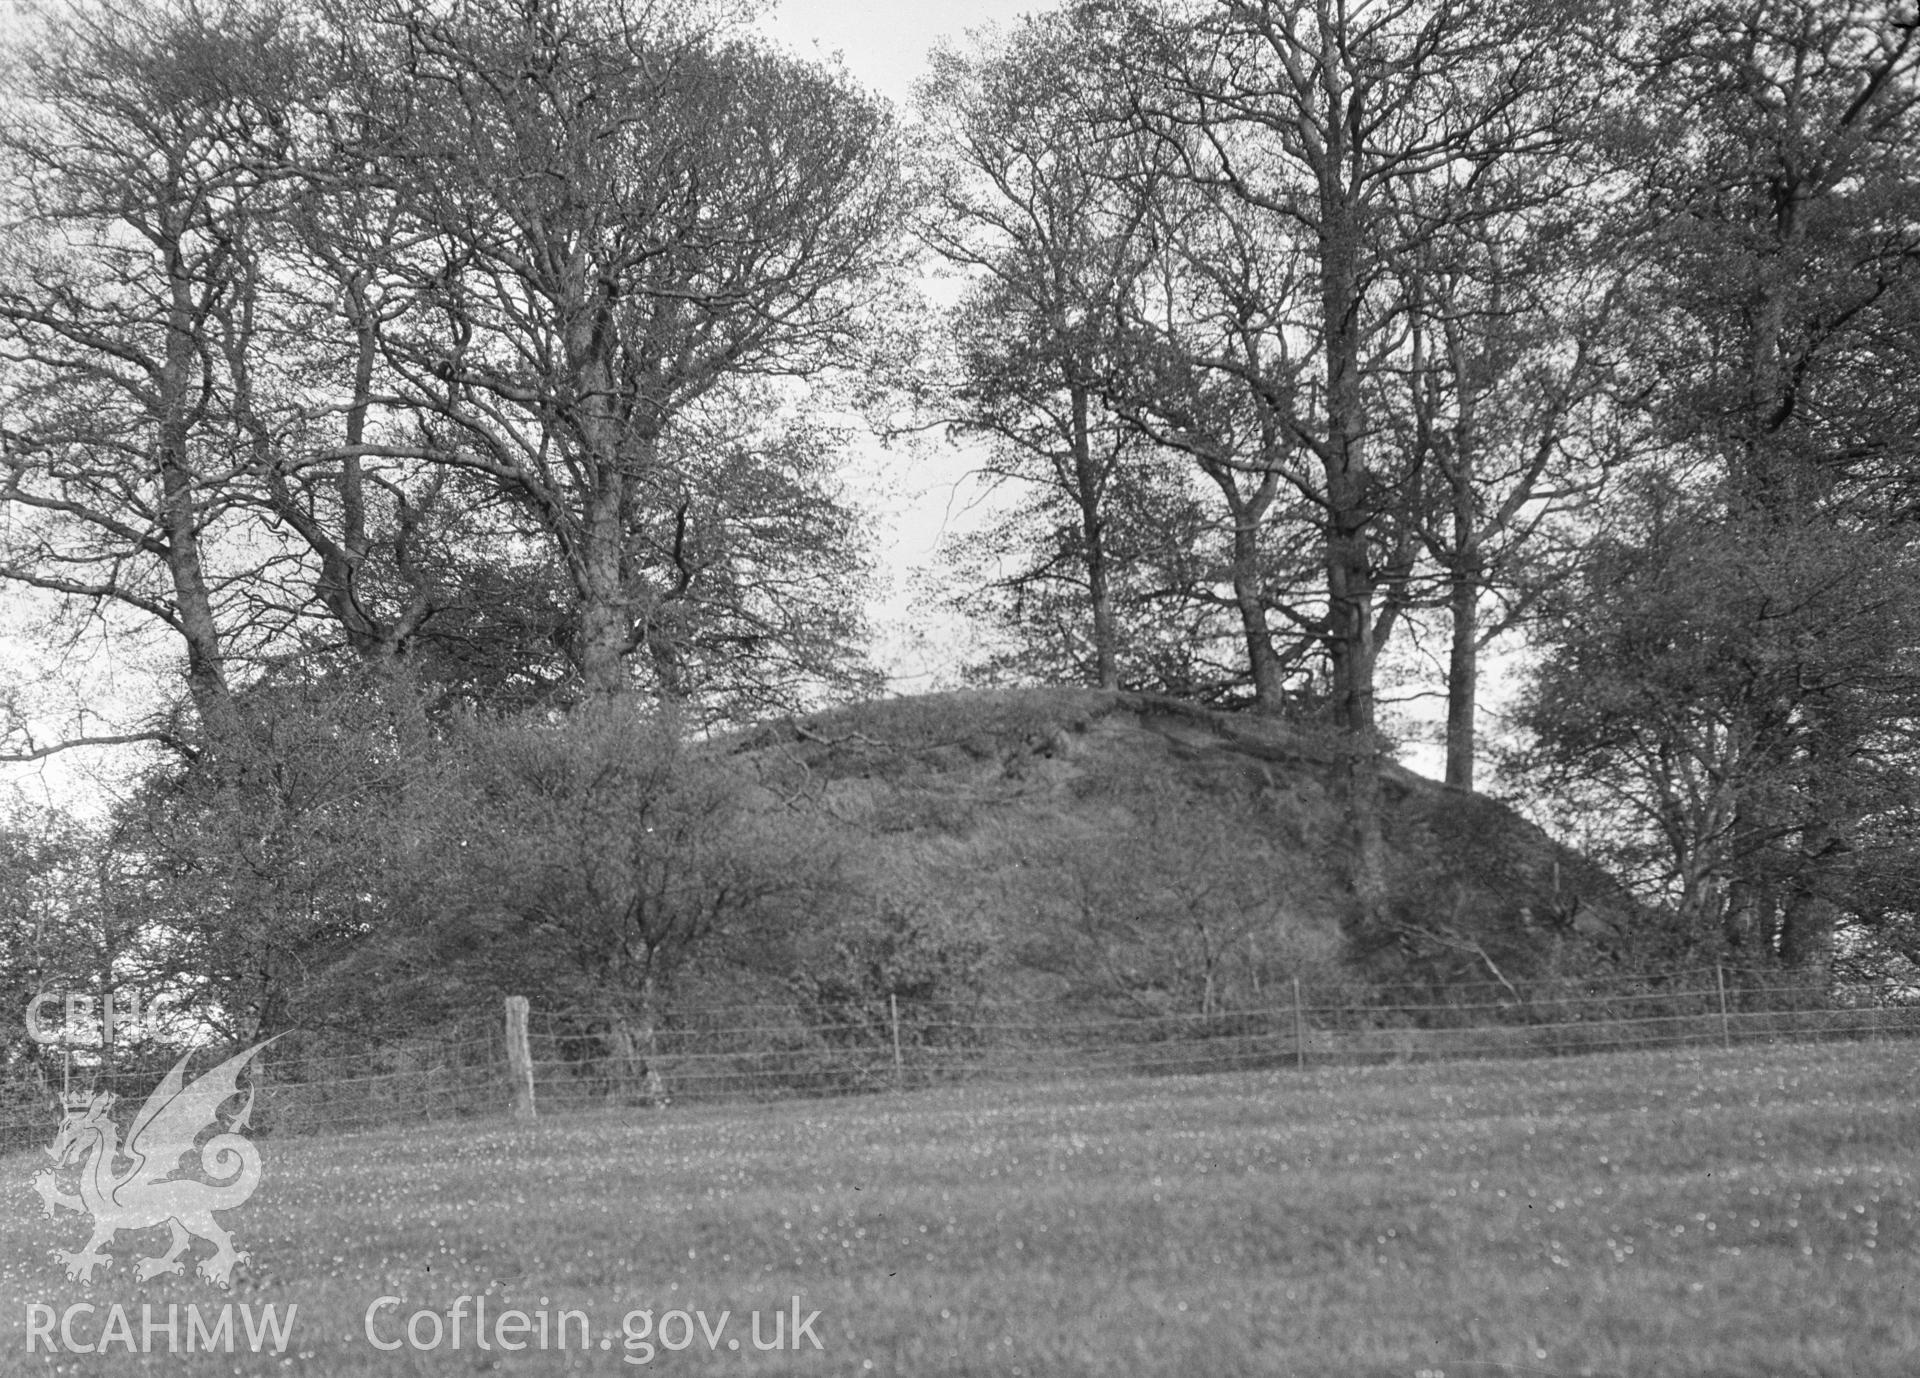 Digital copy of a nitrate negative showing Hygga Dovecot.